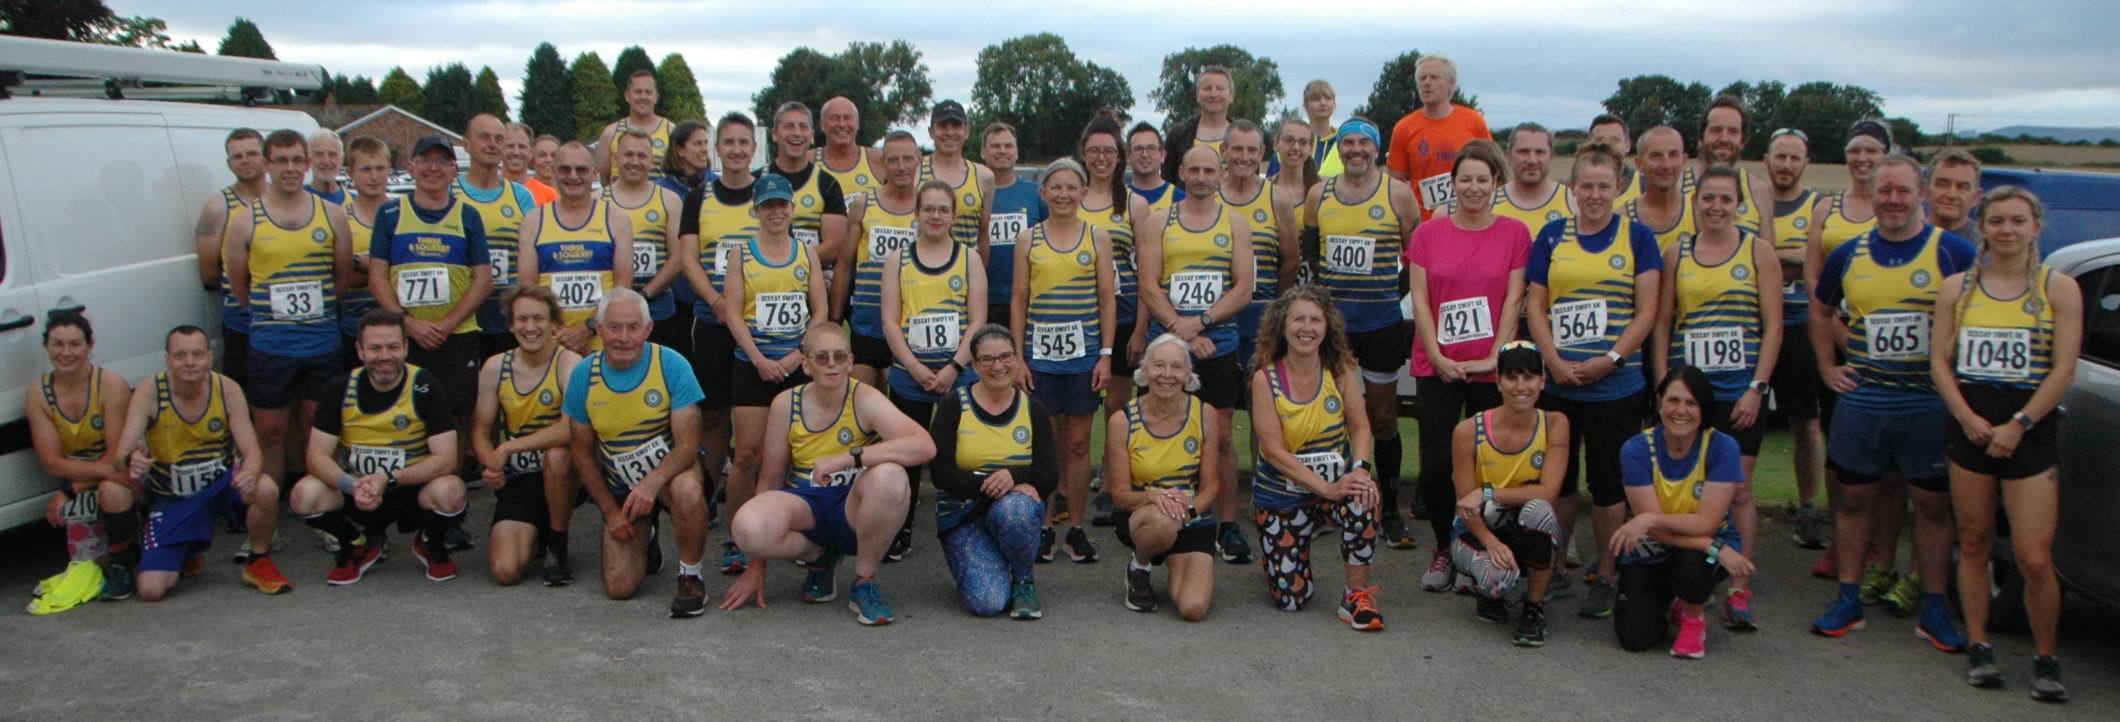 Members of Thirsk and Sowerby Harriers at the Sessay Swift 6k in August